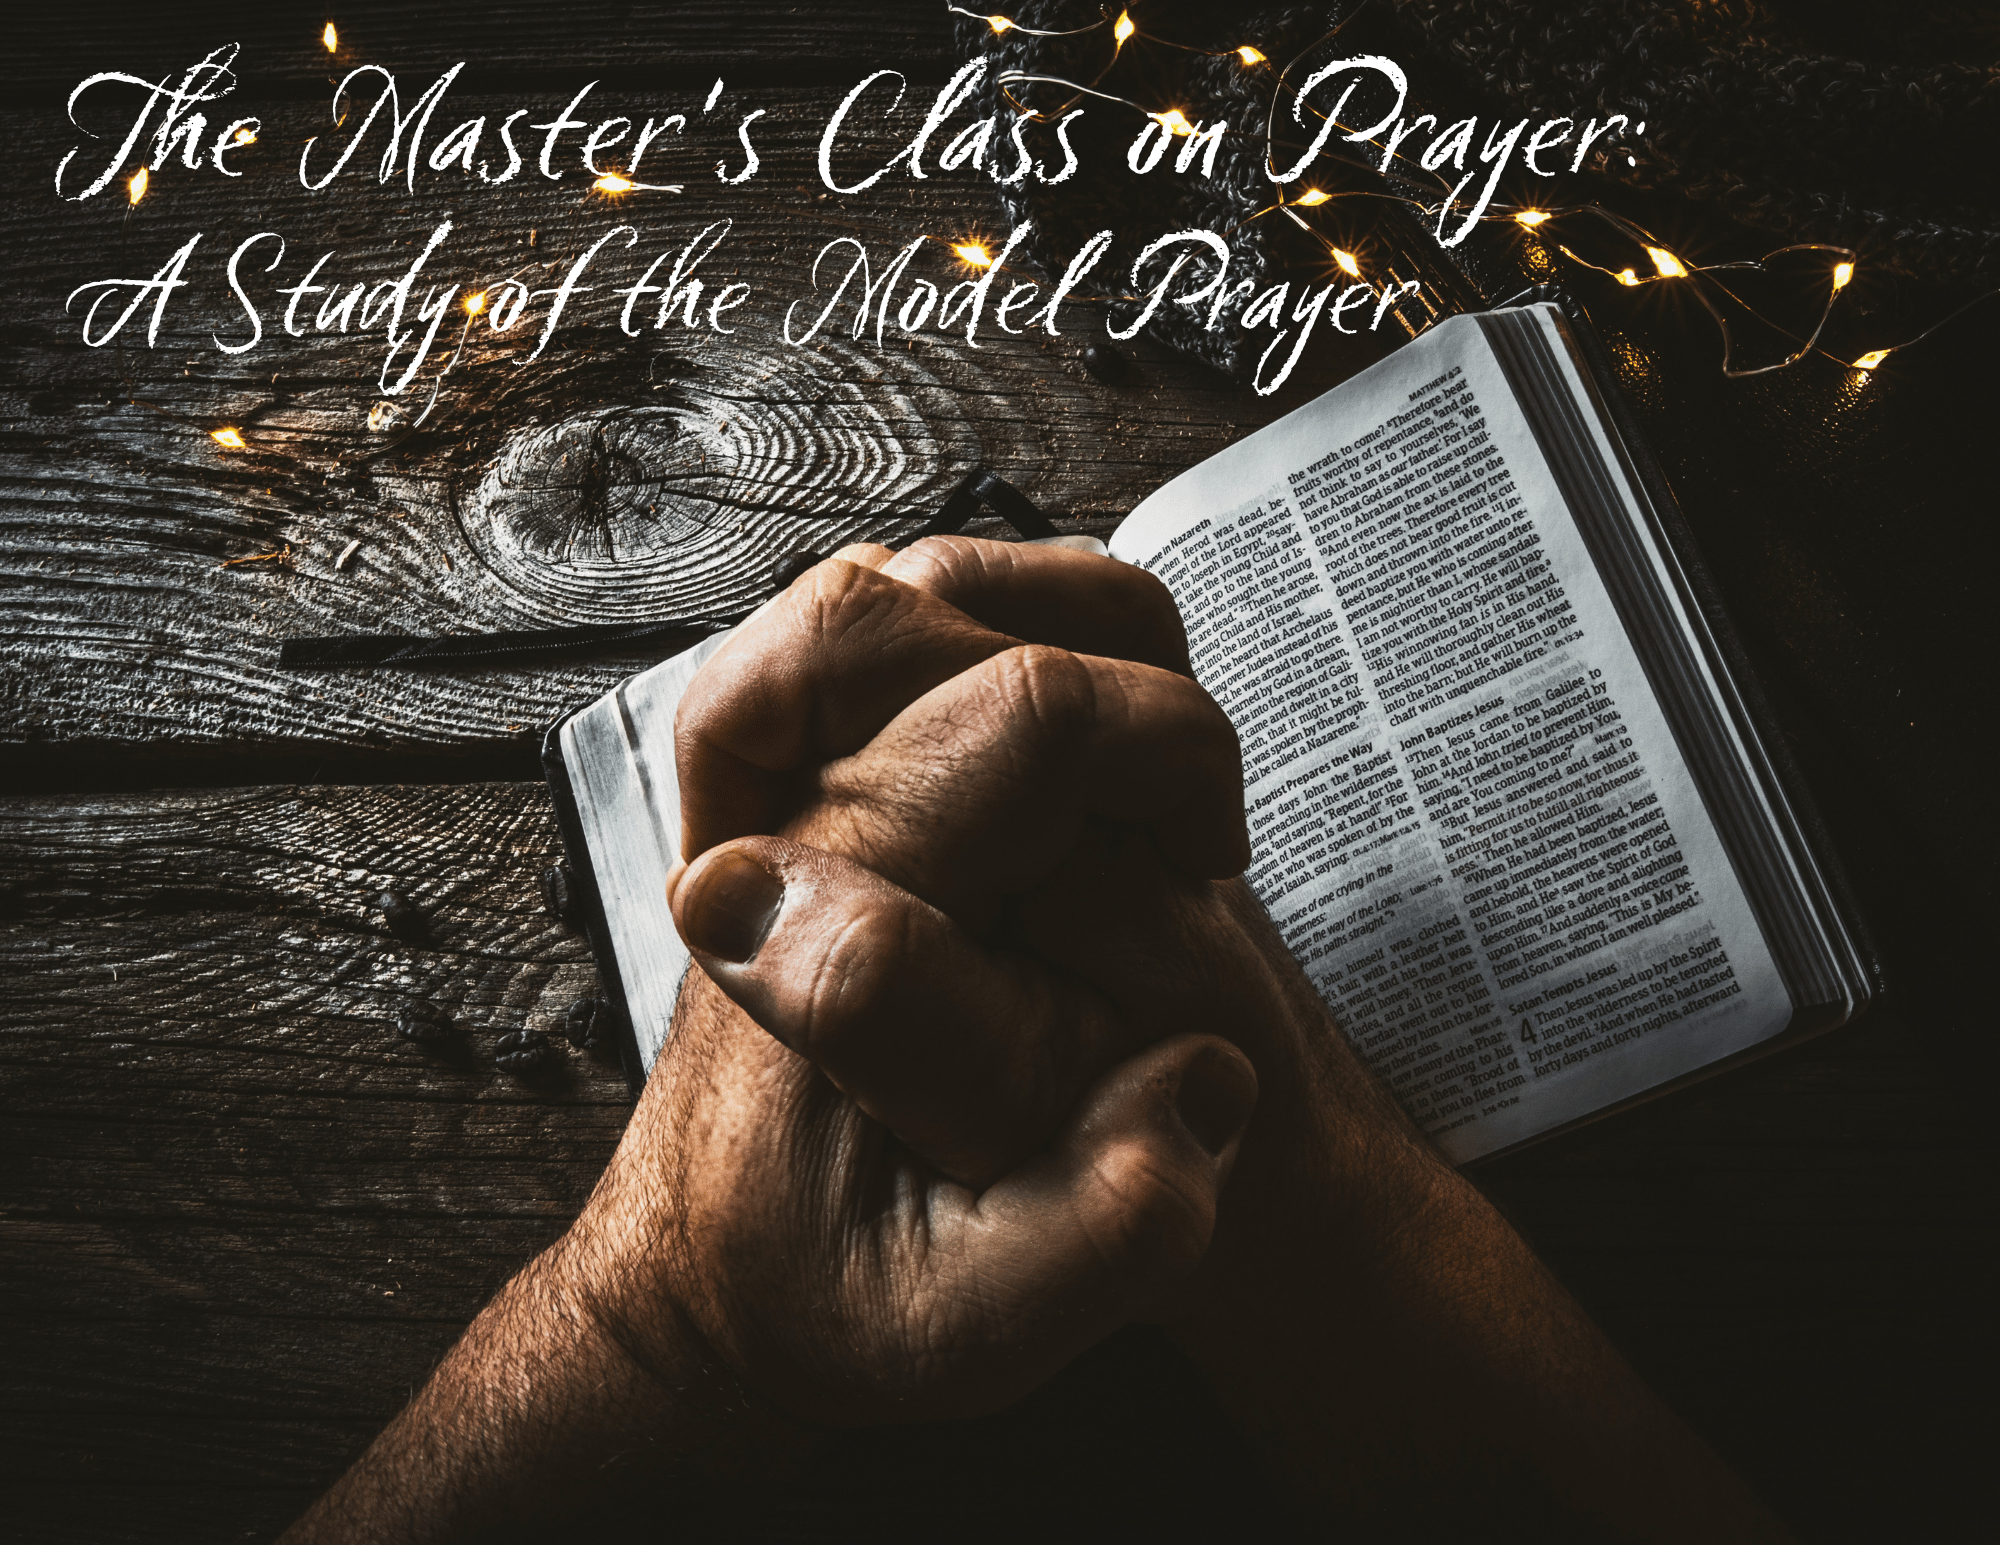 “Master’s Class on Prayer – Allowing God to Speak First”